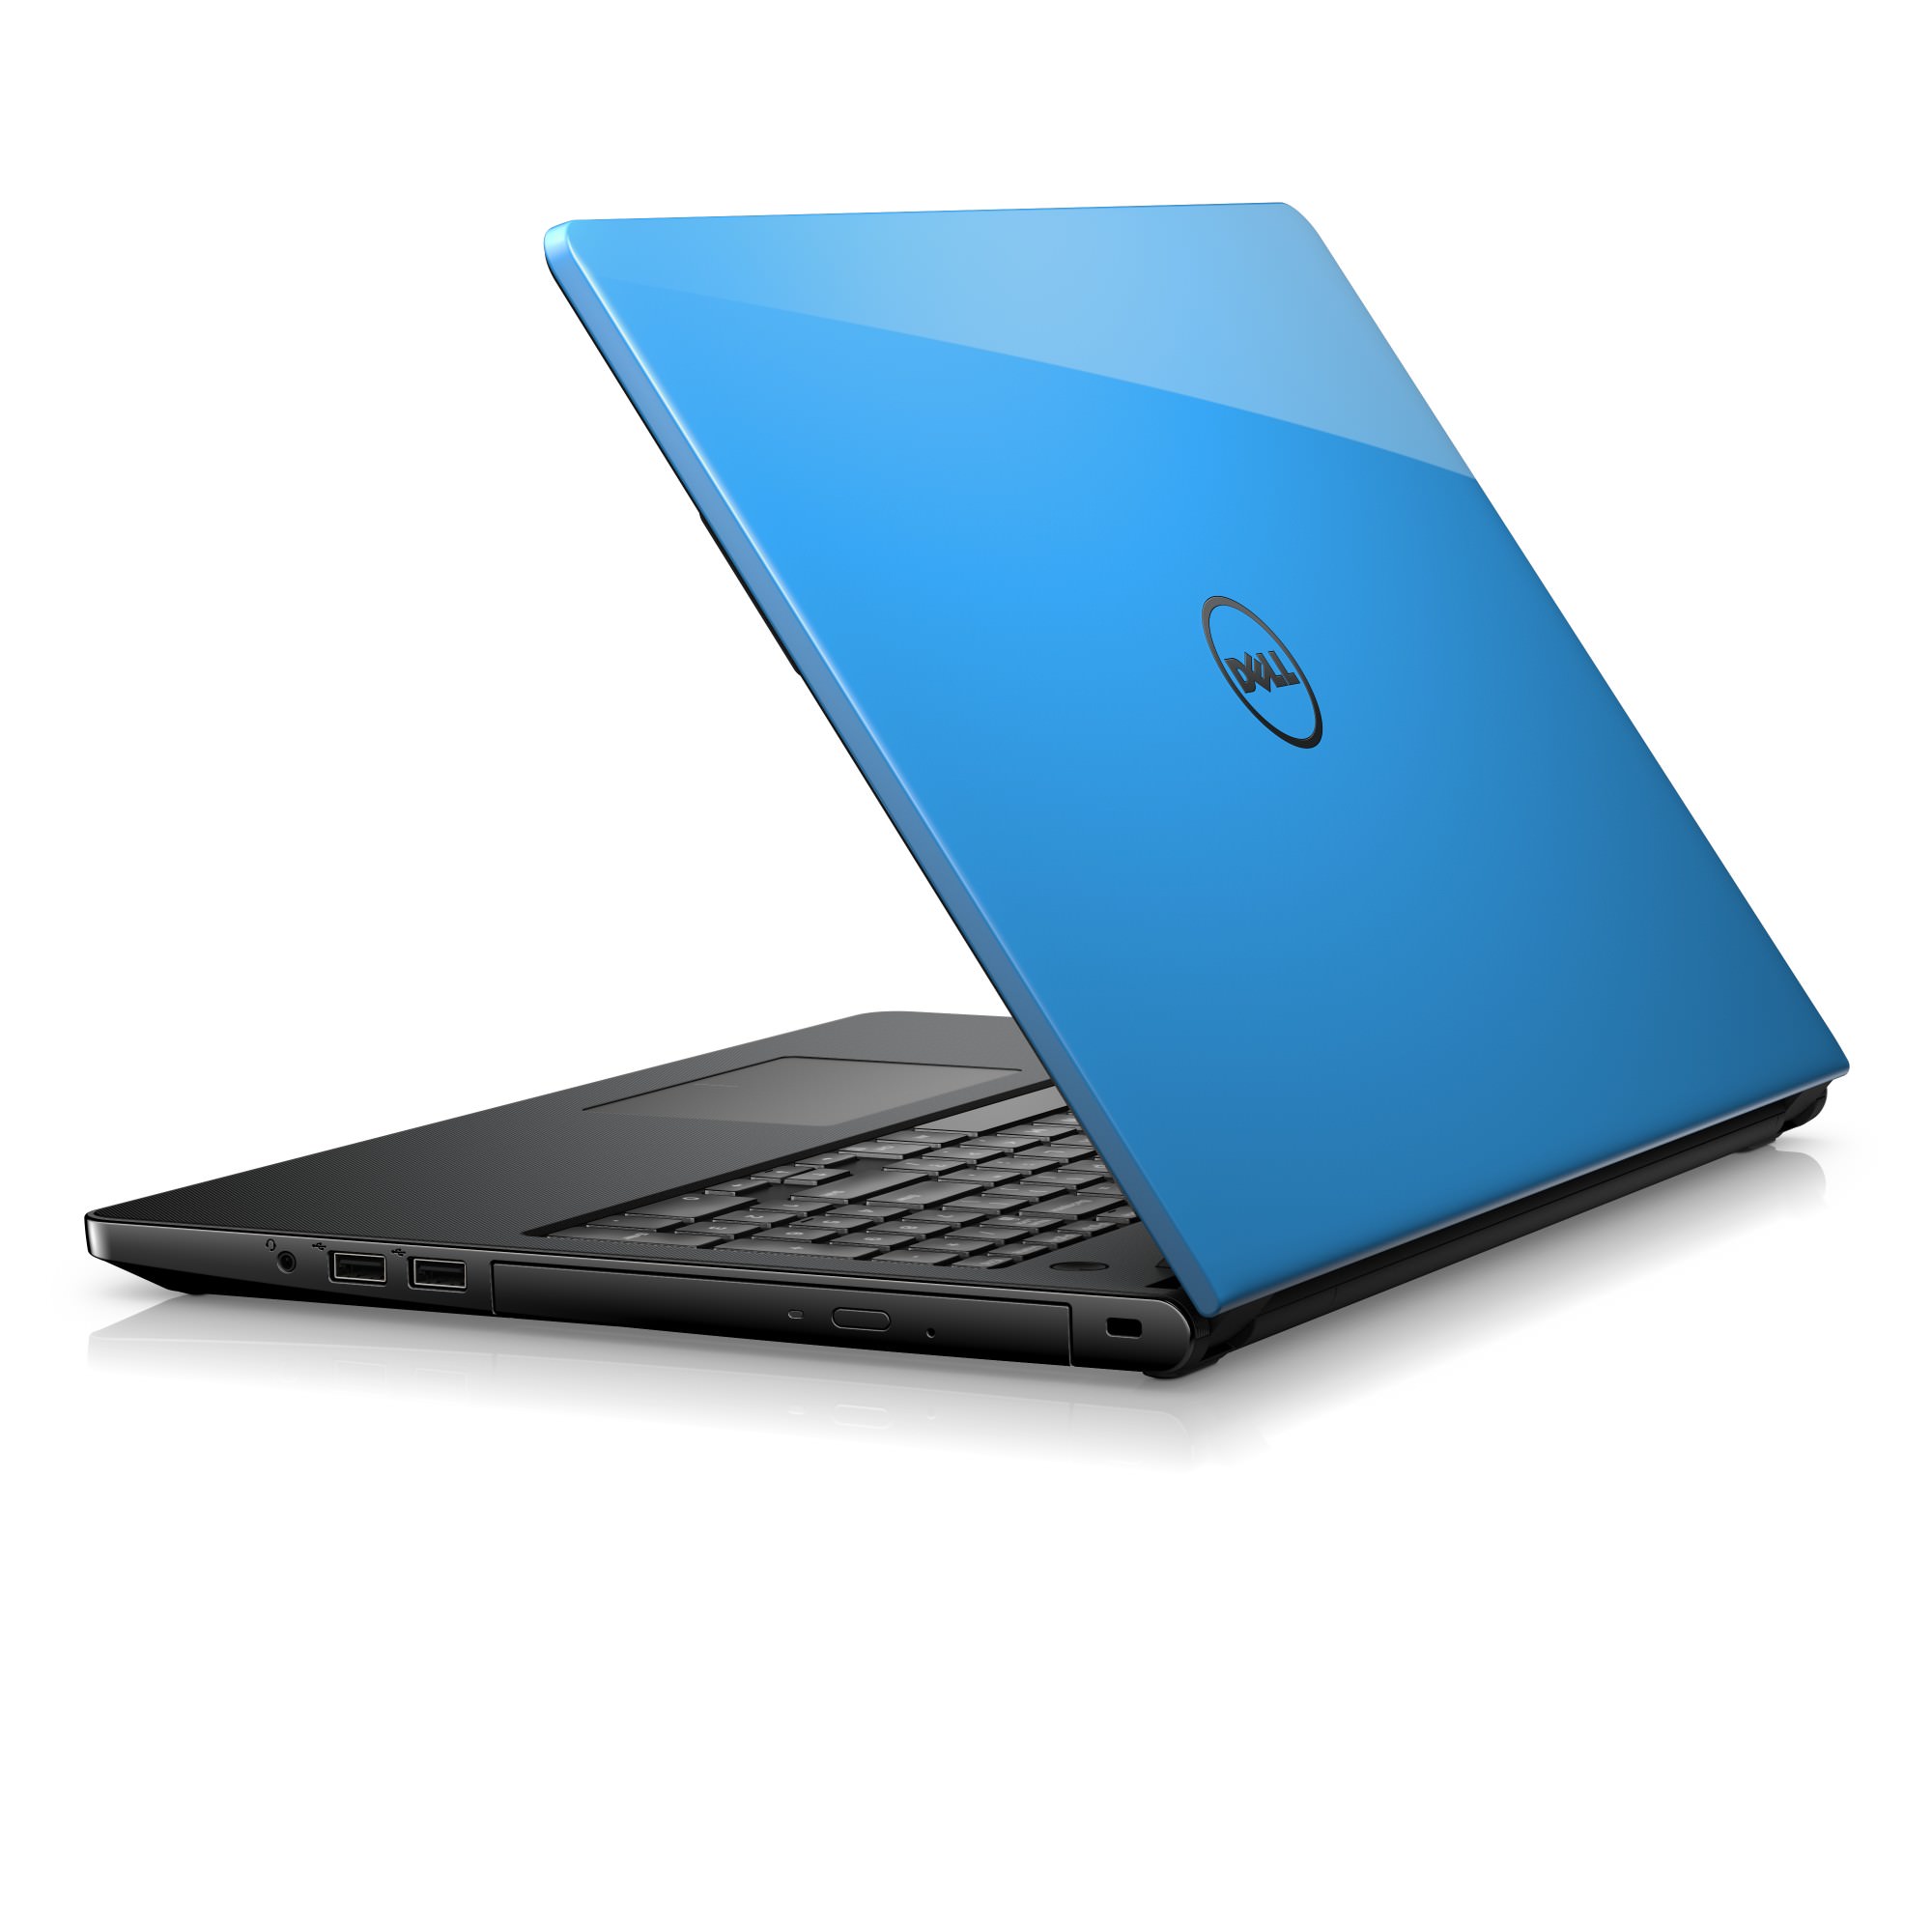 Dell Inspiron 15 3000 Series (Model 3559) Non-Touch 15-inch notebook computer with Skylake (SKY) processor.